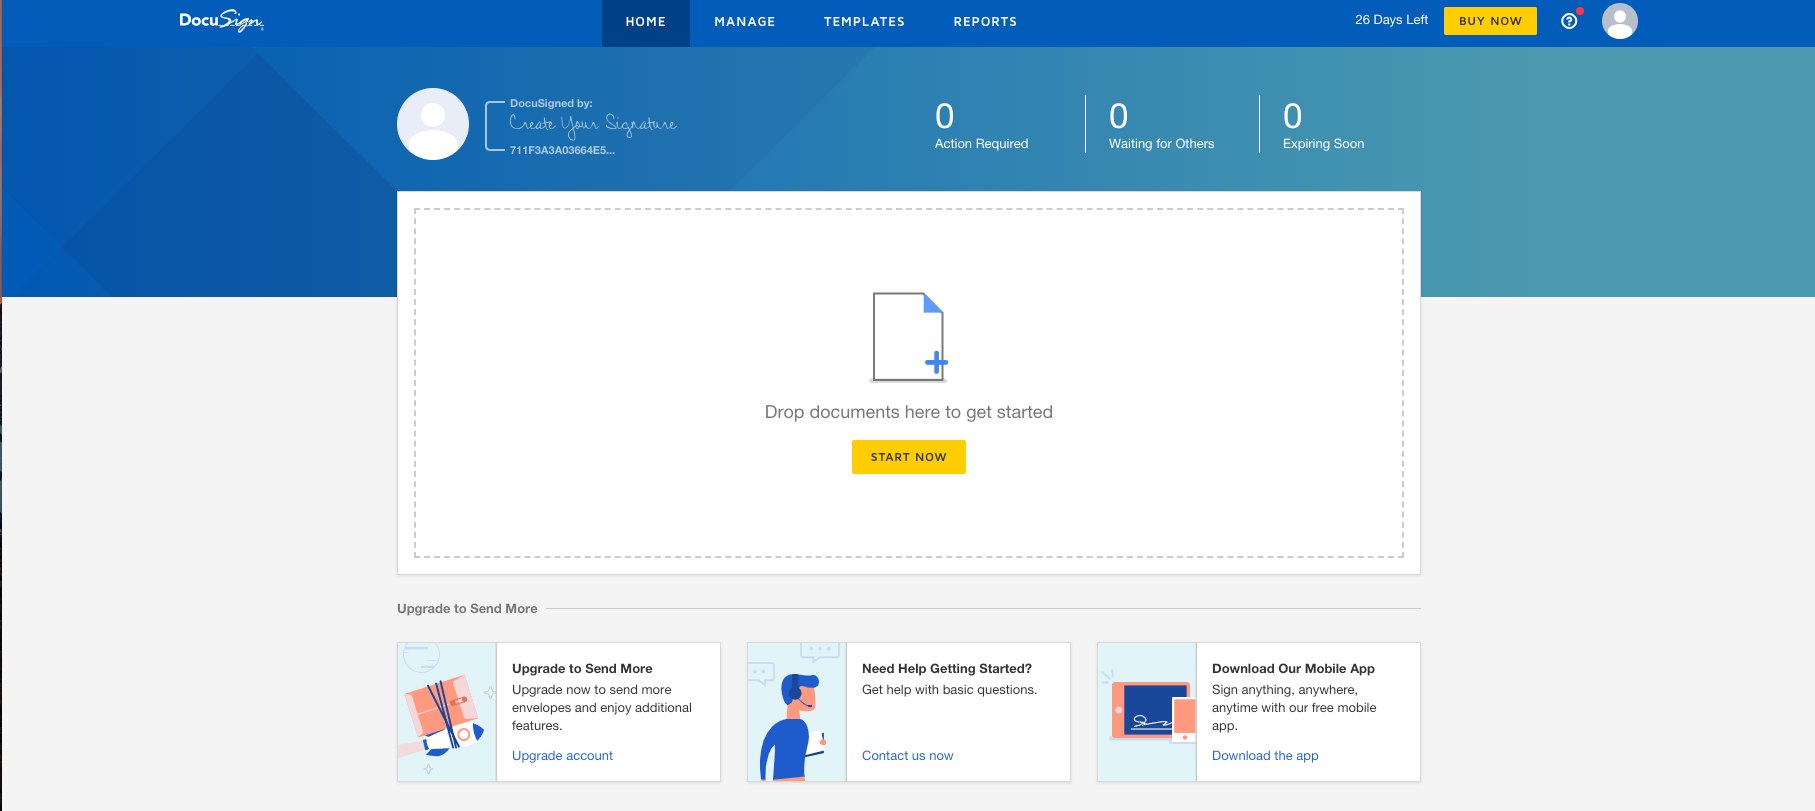 dropbox to acquire secure document sharing